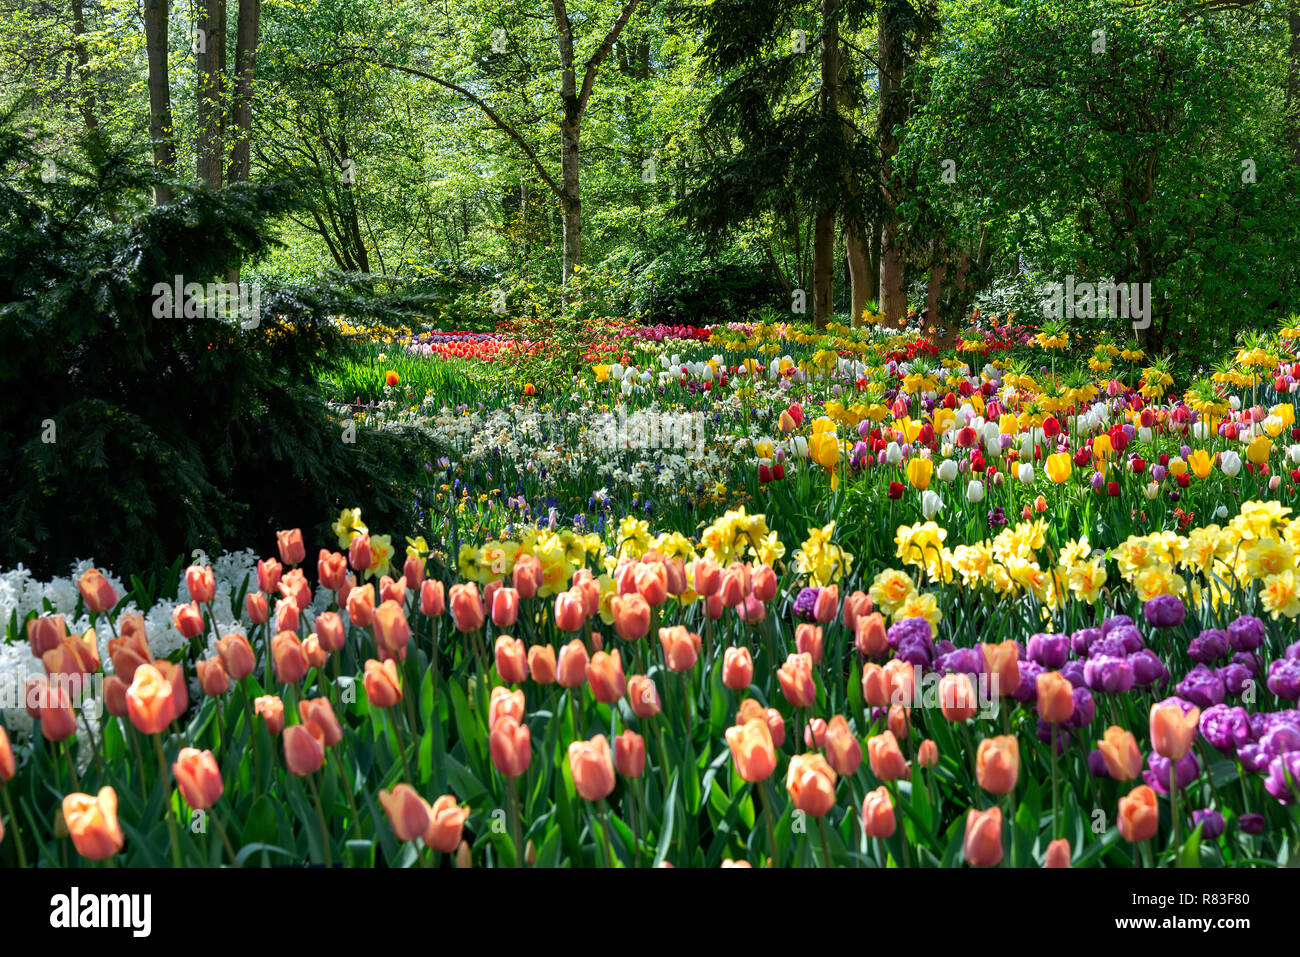 display of spring flowering bulbs at the world's largest bulb flower